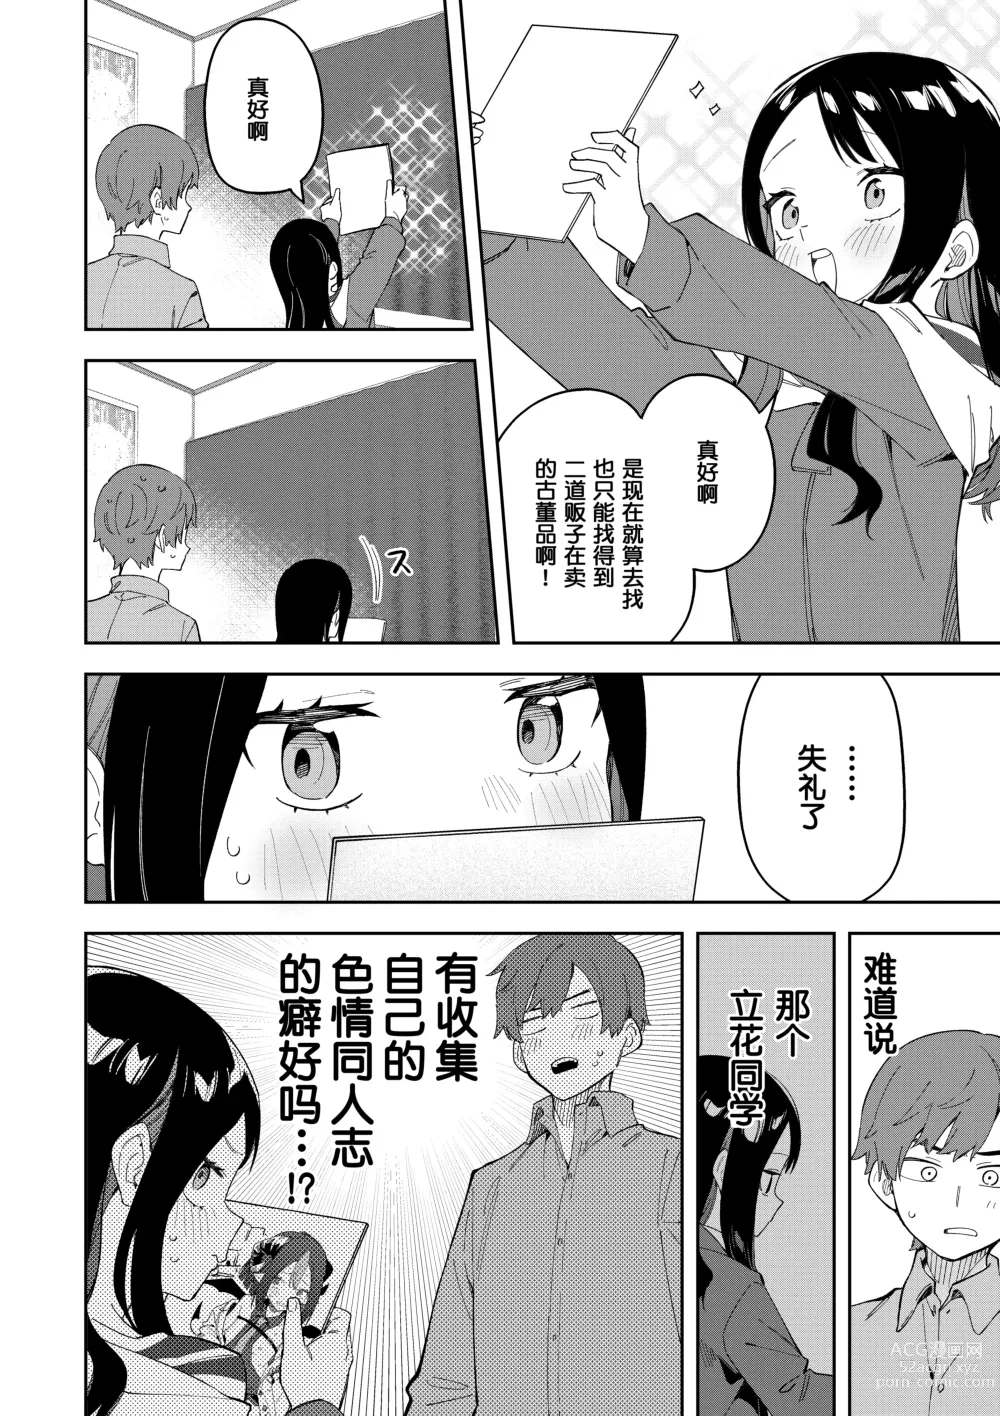 Page 14 of doujinshi 隣人は有名配信者3人目